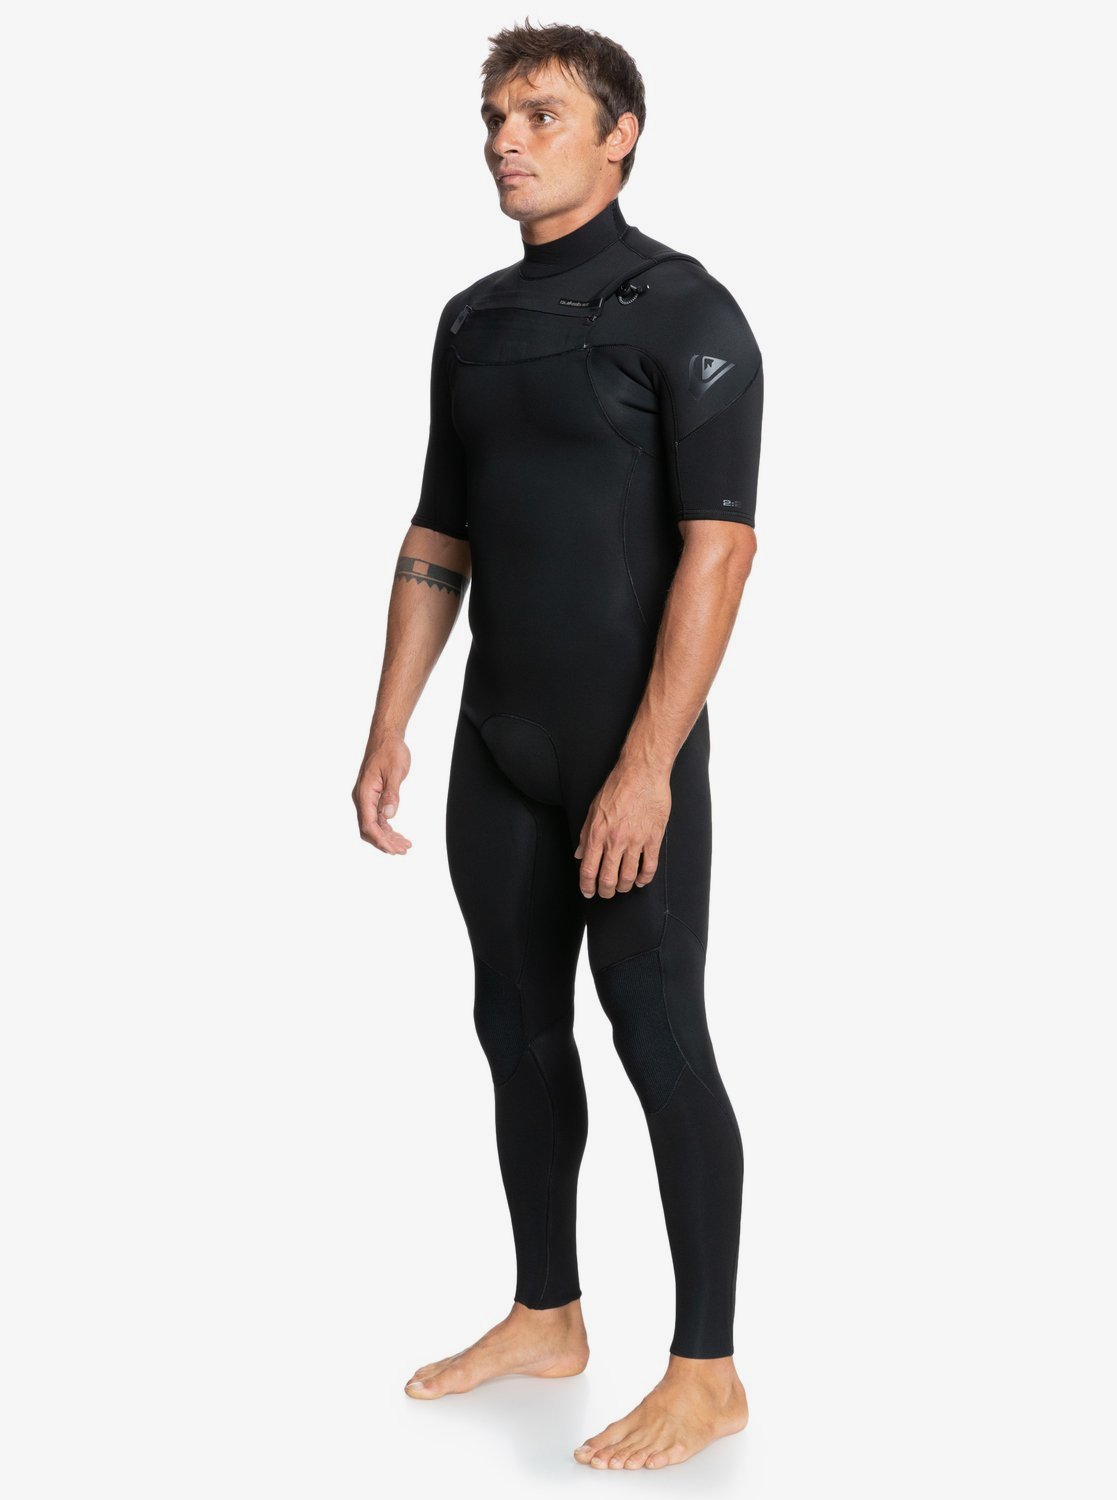 QUIKSILVER Everyday Sessions 2/2 Chest Zip Short Arm Steamer